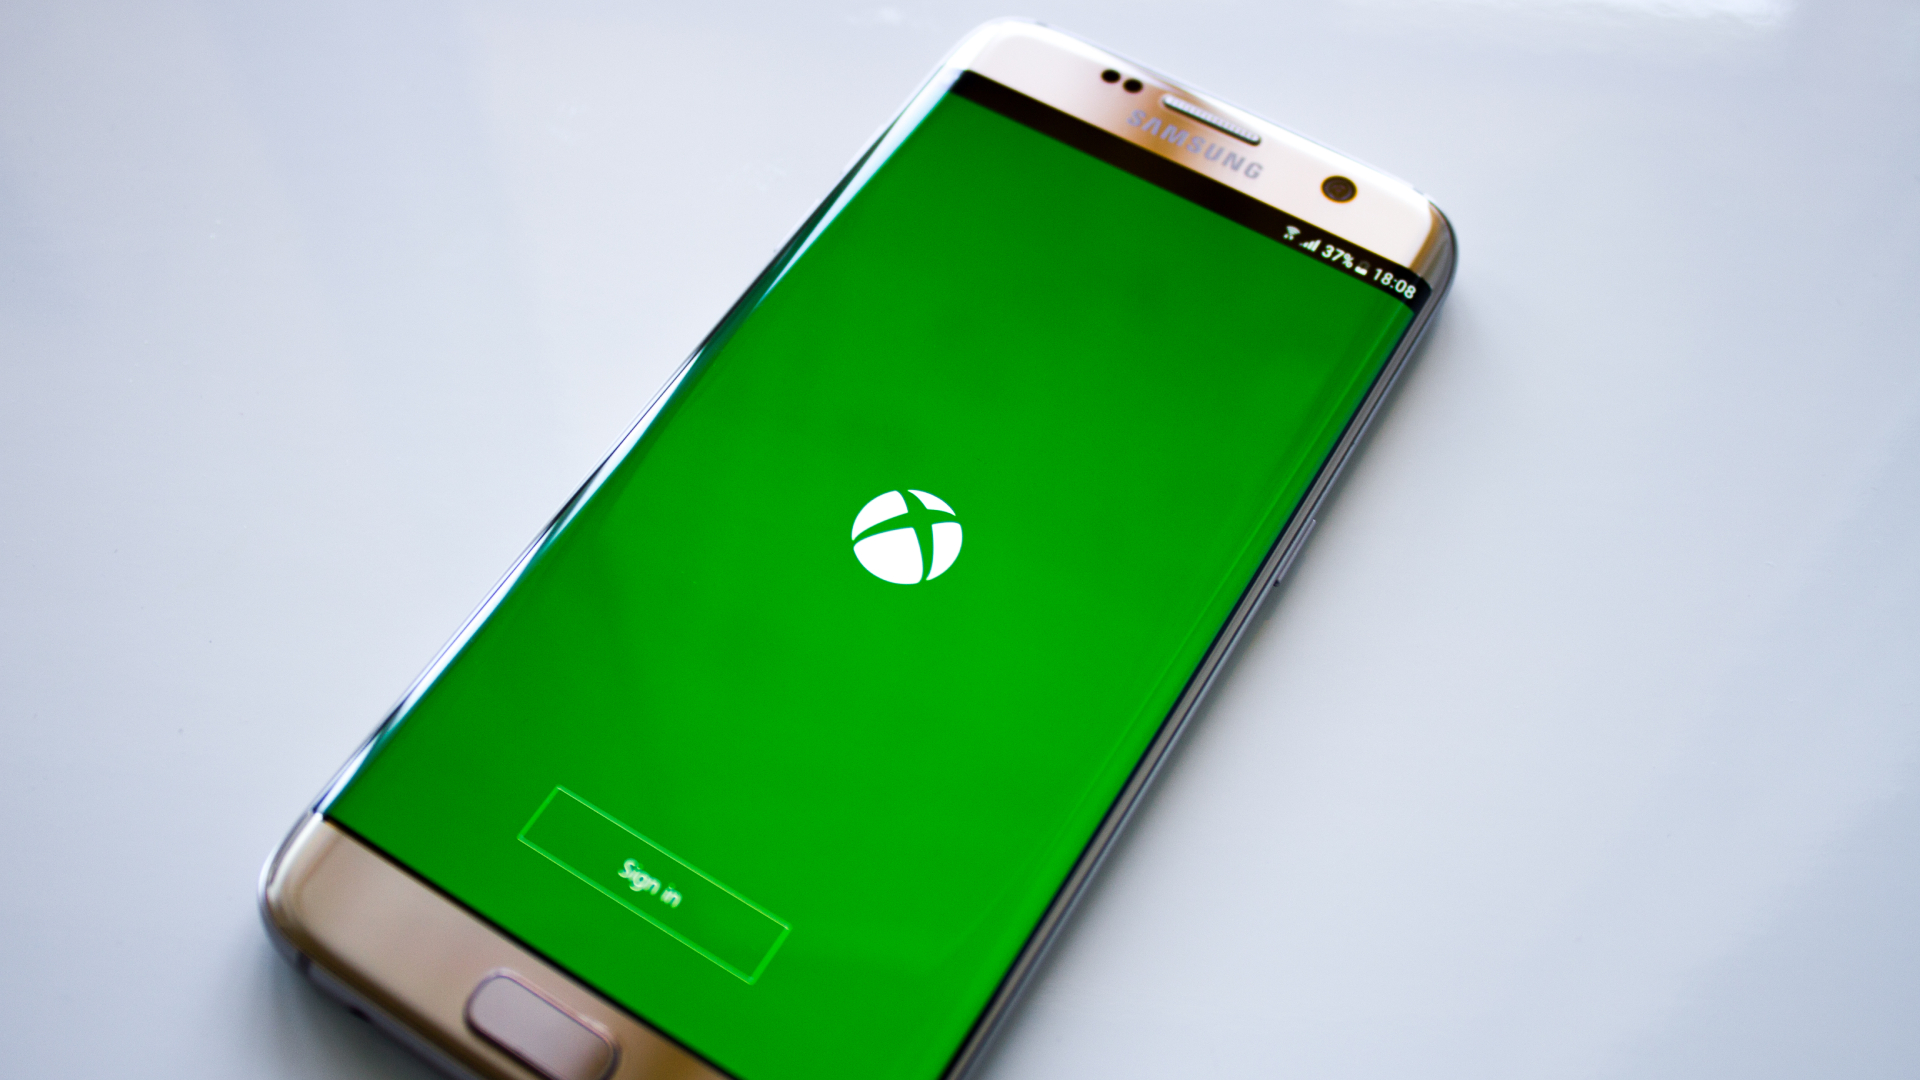 Xbox cloud gaming played on Samsung smartphones